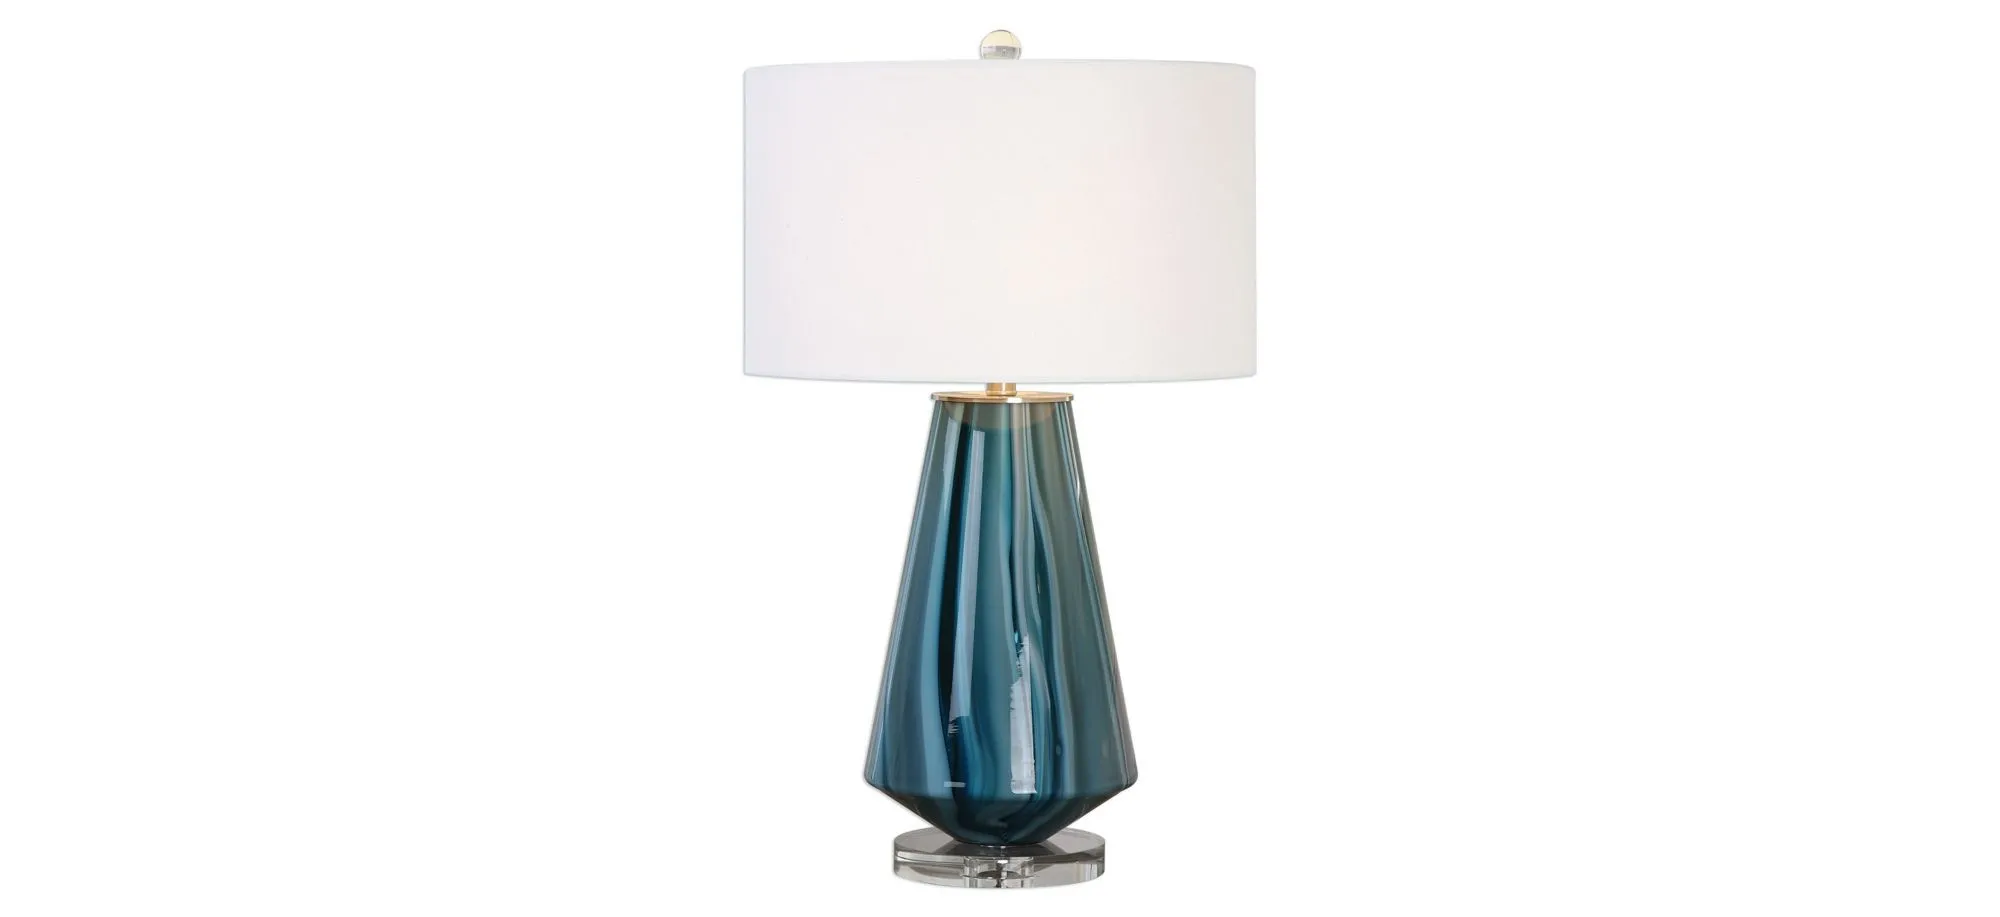 Pescara Table Lamp in Teal-Gray Glass by Uttermost